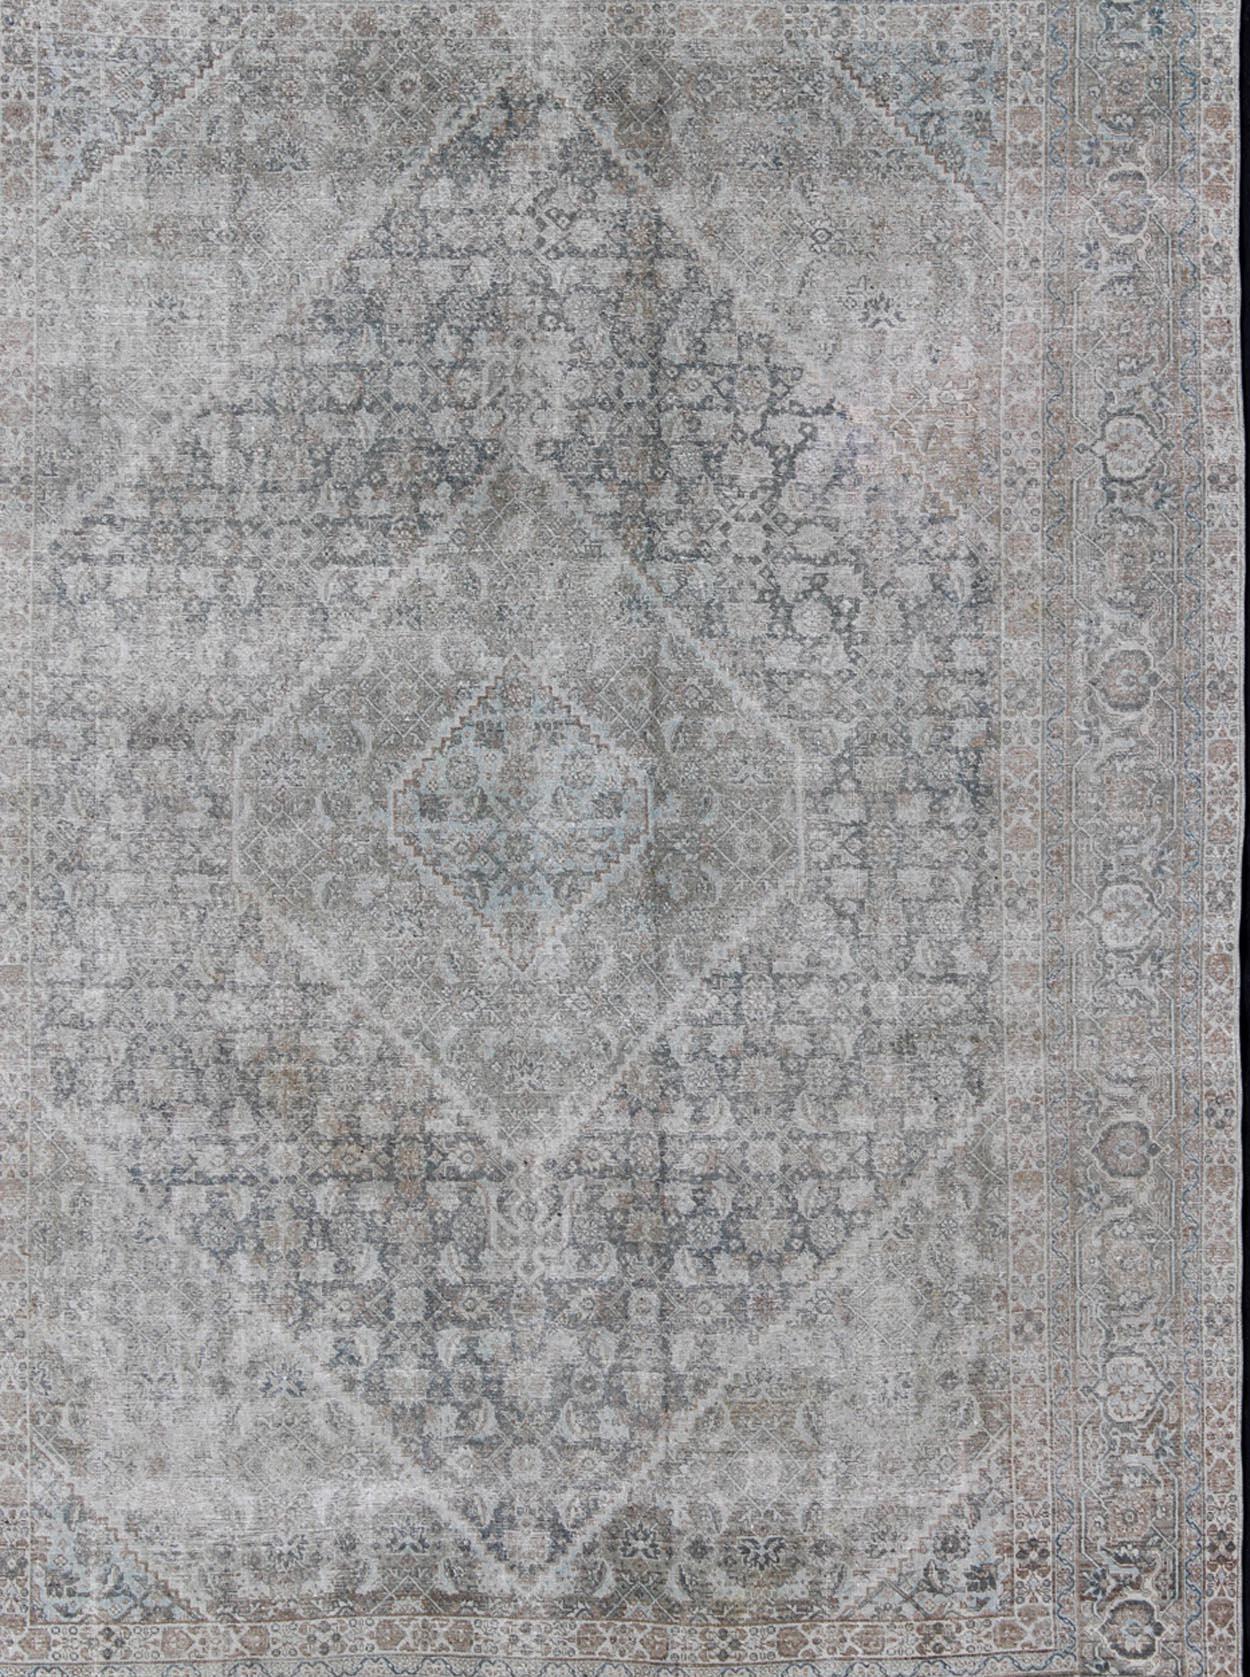 Hand-Knotted Antique Persian Tabriz Rug in Muted Colors with Layered Medallion Design